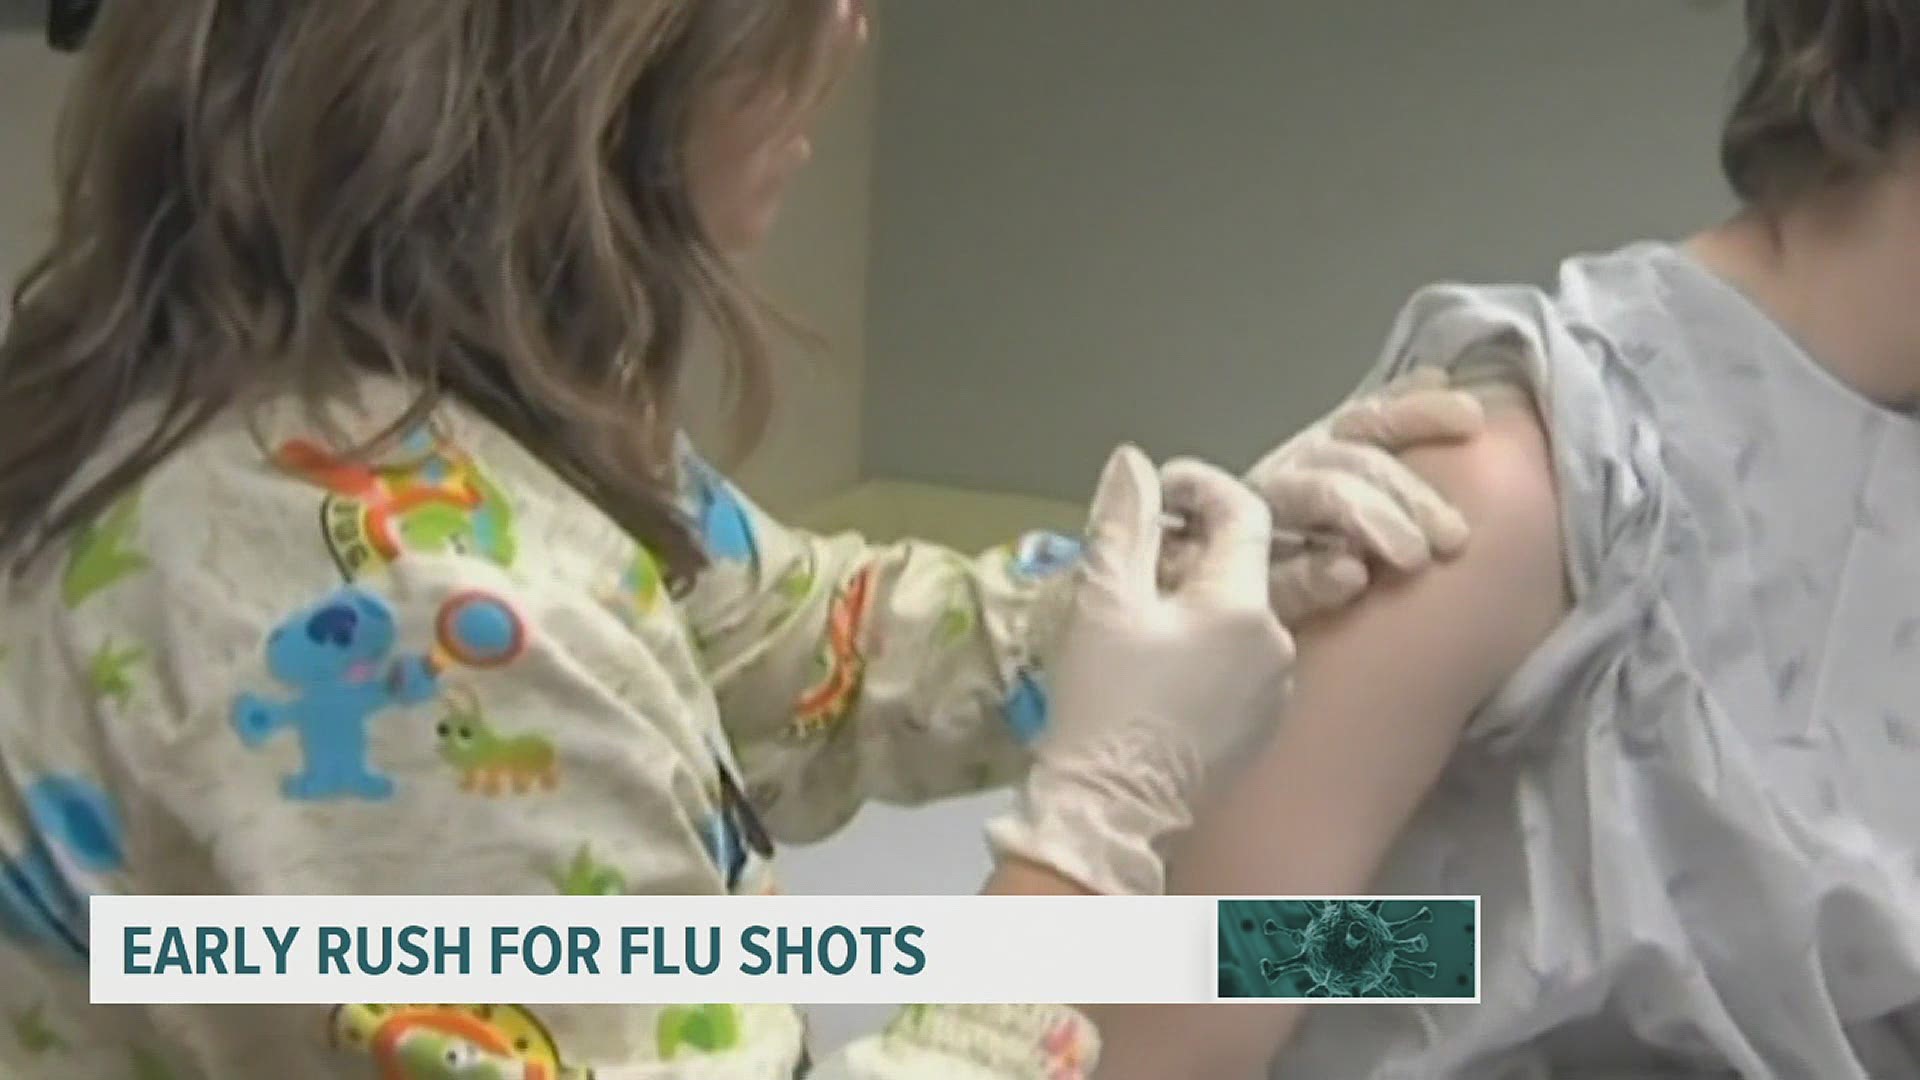 Pharmacy owners are working to order more shots as the state sends message that a flu shot is more important than ever during the COVID-19 pandemic